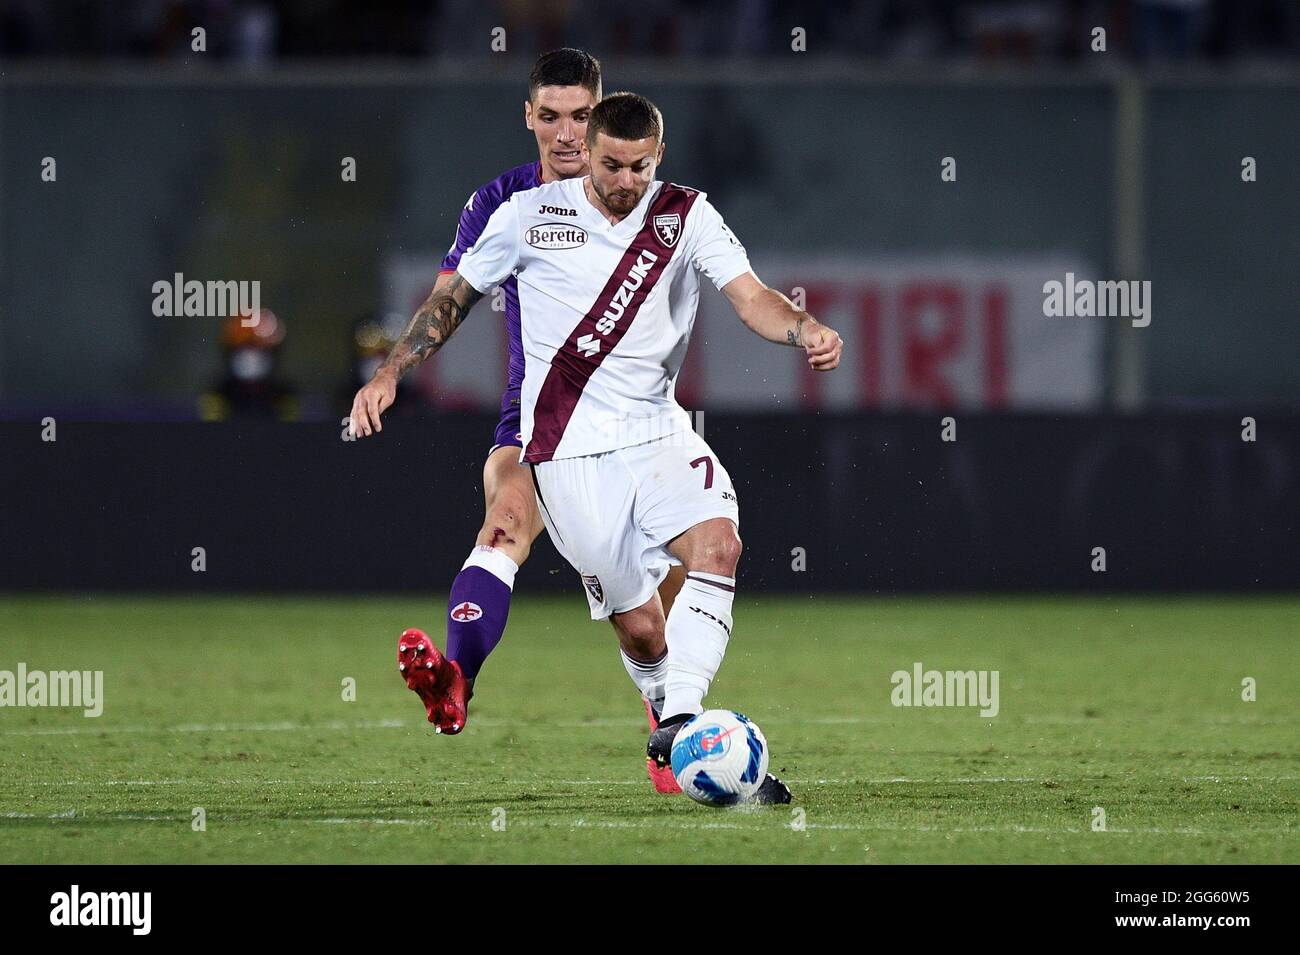 Florence, Italy. 28th Aug, 2021. Karol Linetti (Torino FC) in action  against Nikola Milenkovic (ACF Fiorentina) during ACF Fiorentina vs Torino  FC, Italian football Serie A match in Florence, Italy, August 28